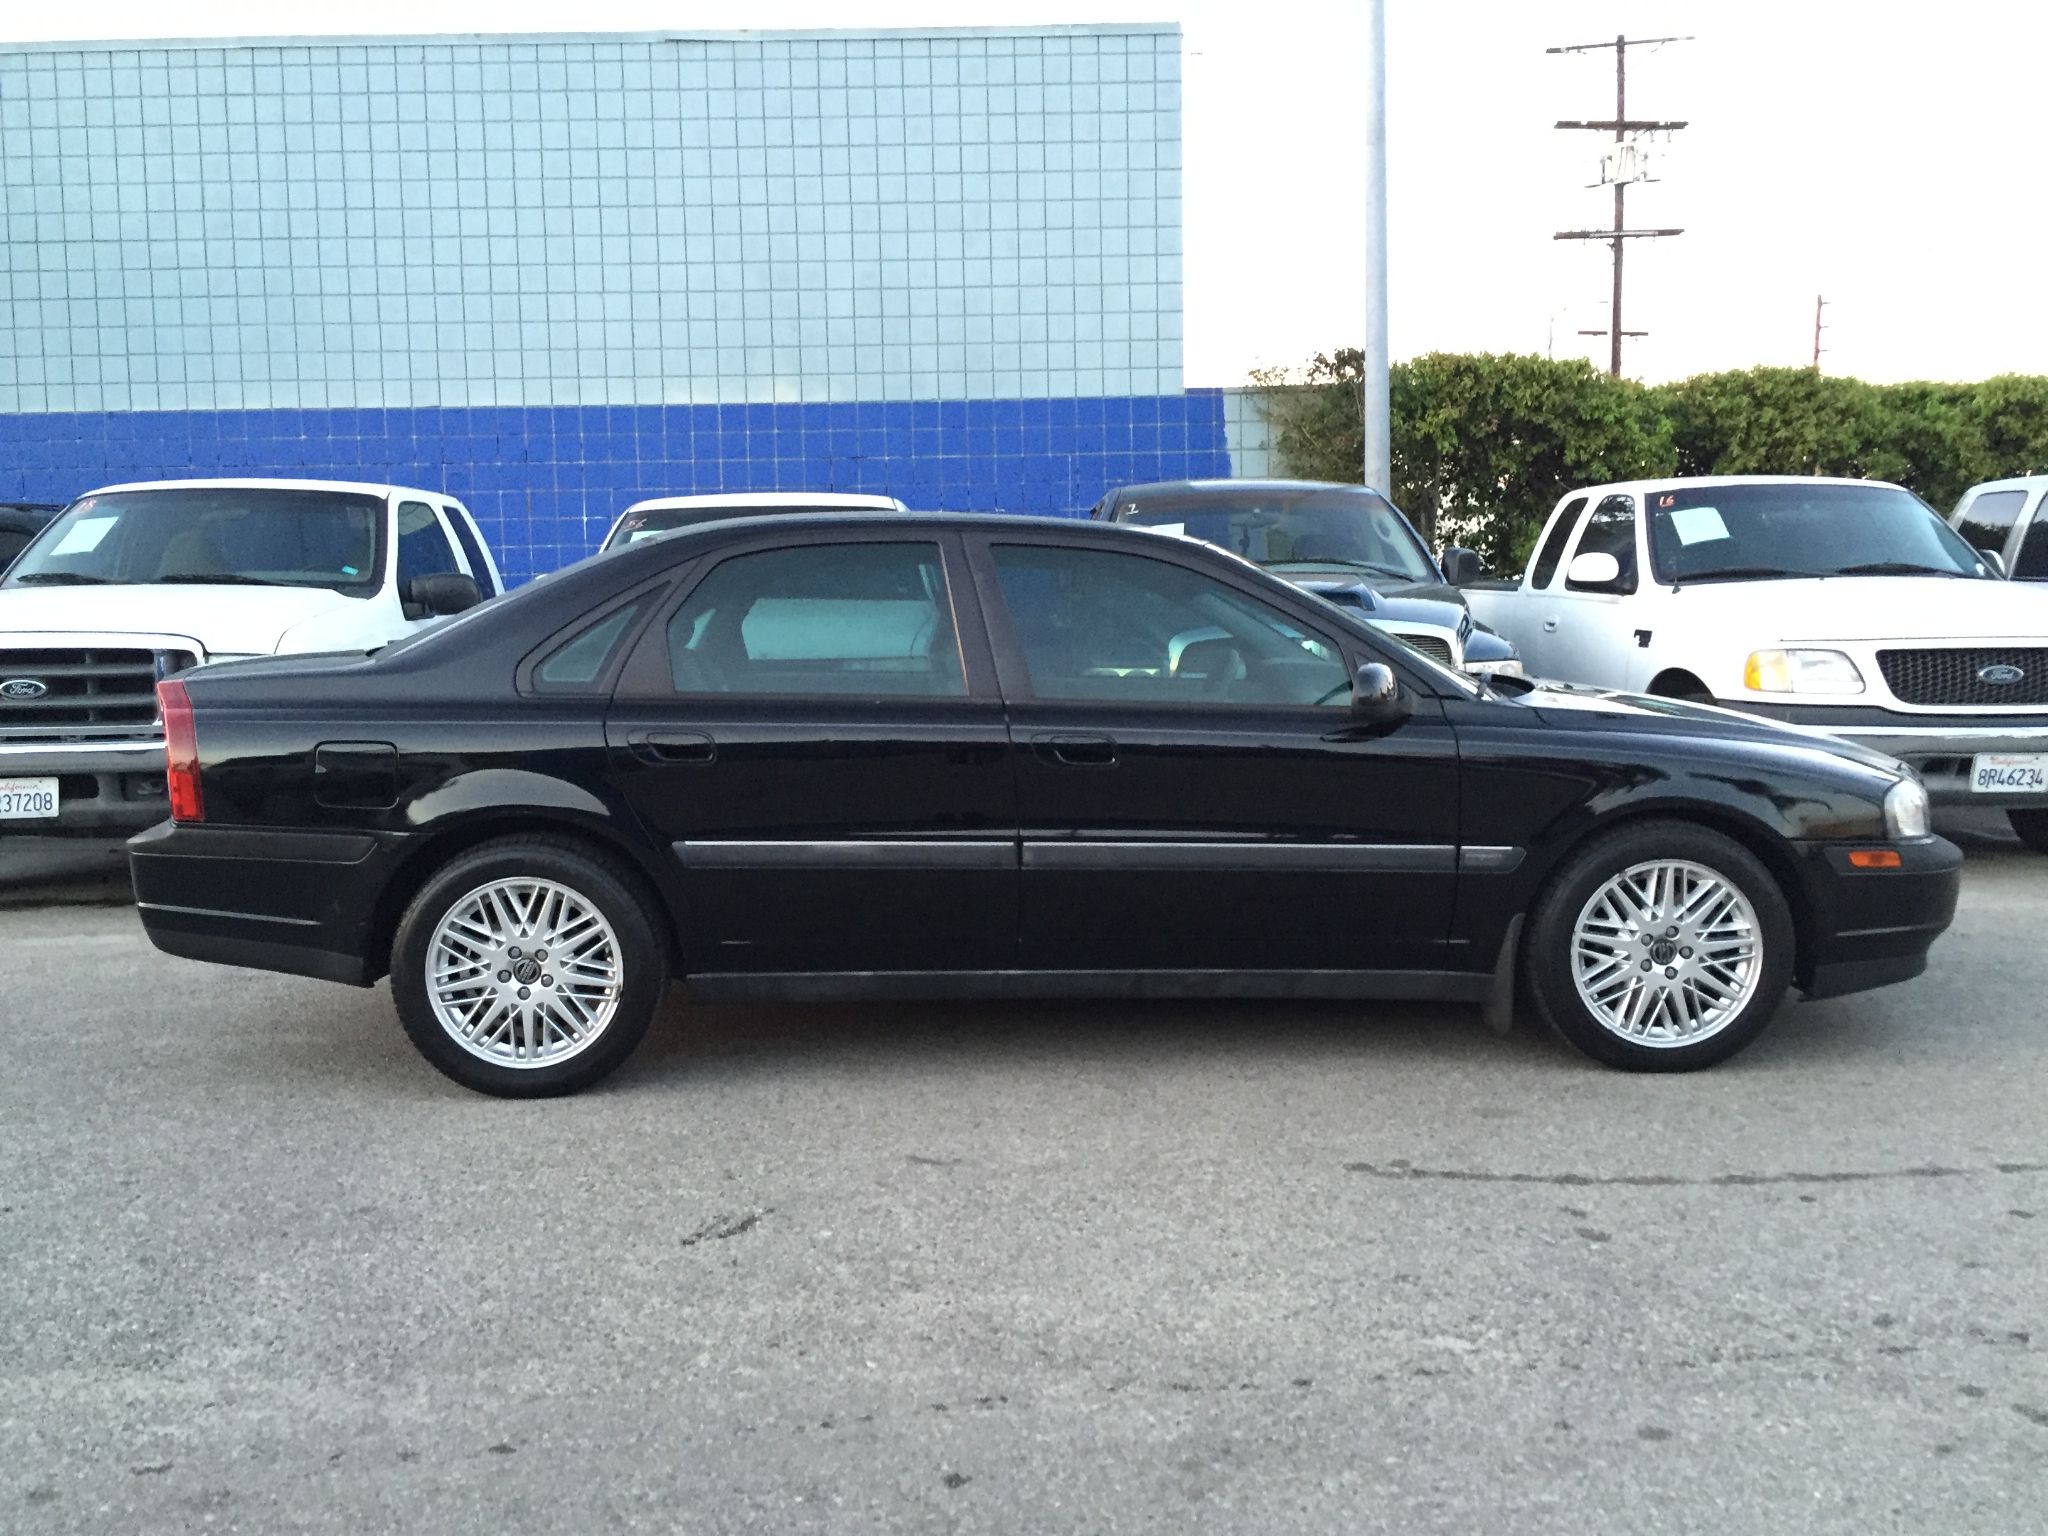 Used 2002 Volvo S80 T6 at City Cars Warehouse INC